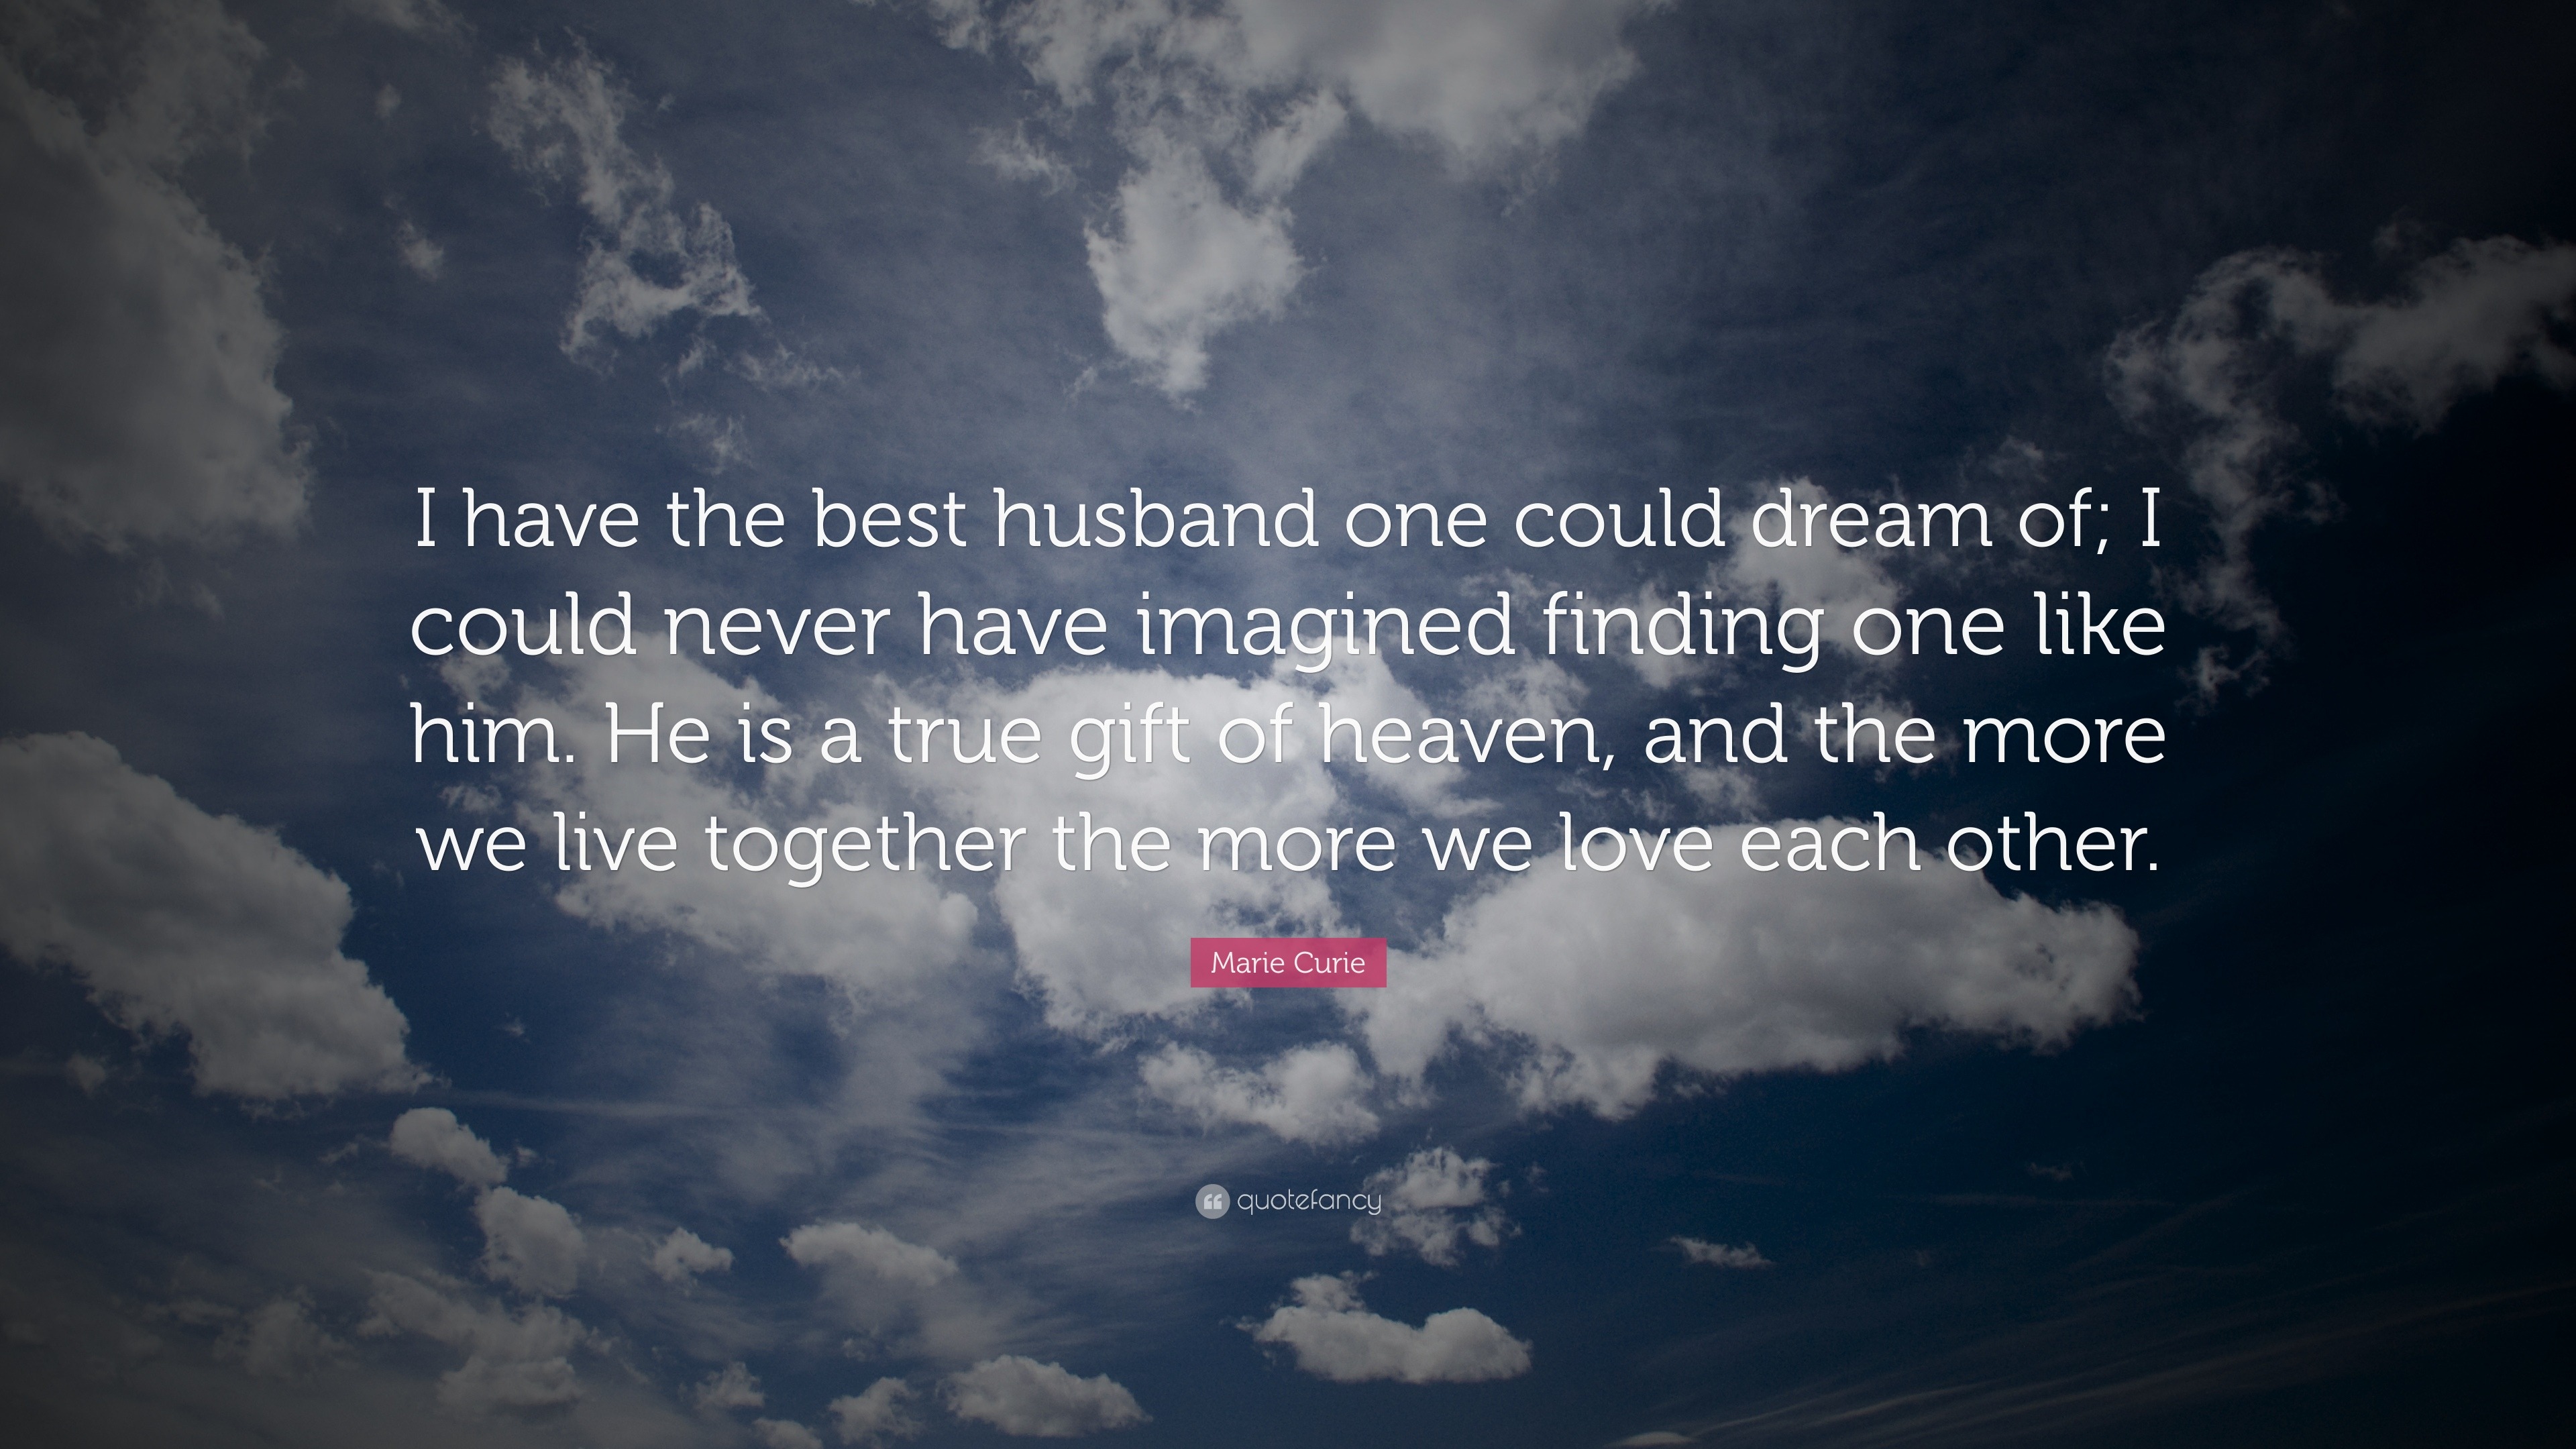 Wedding Anniversary Quotes - One of the greatest gifts you can...